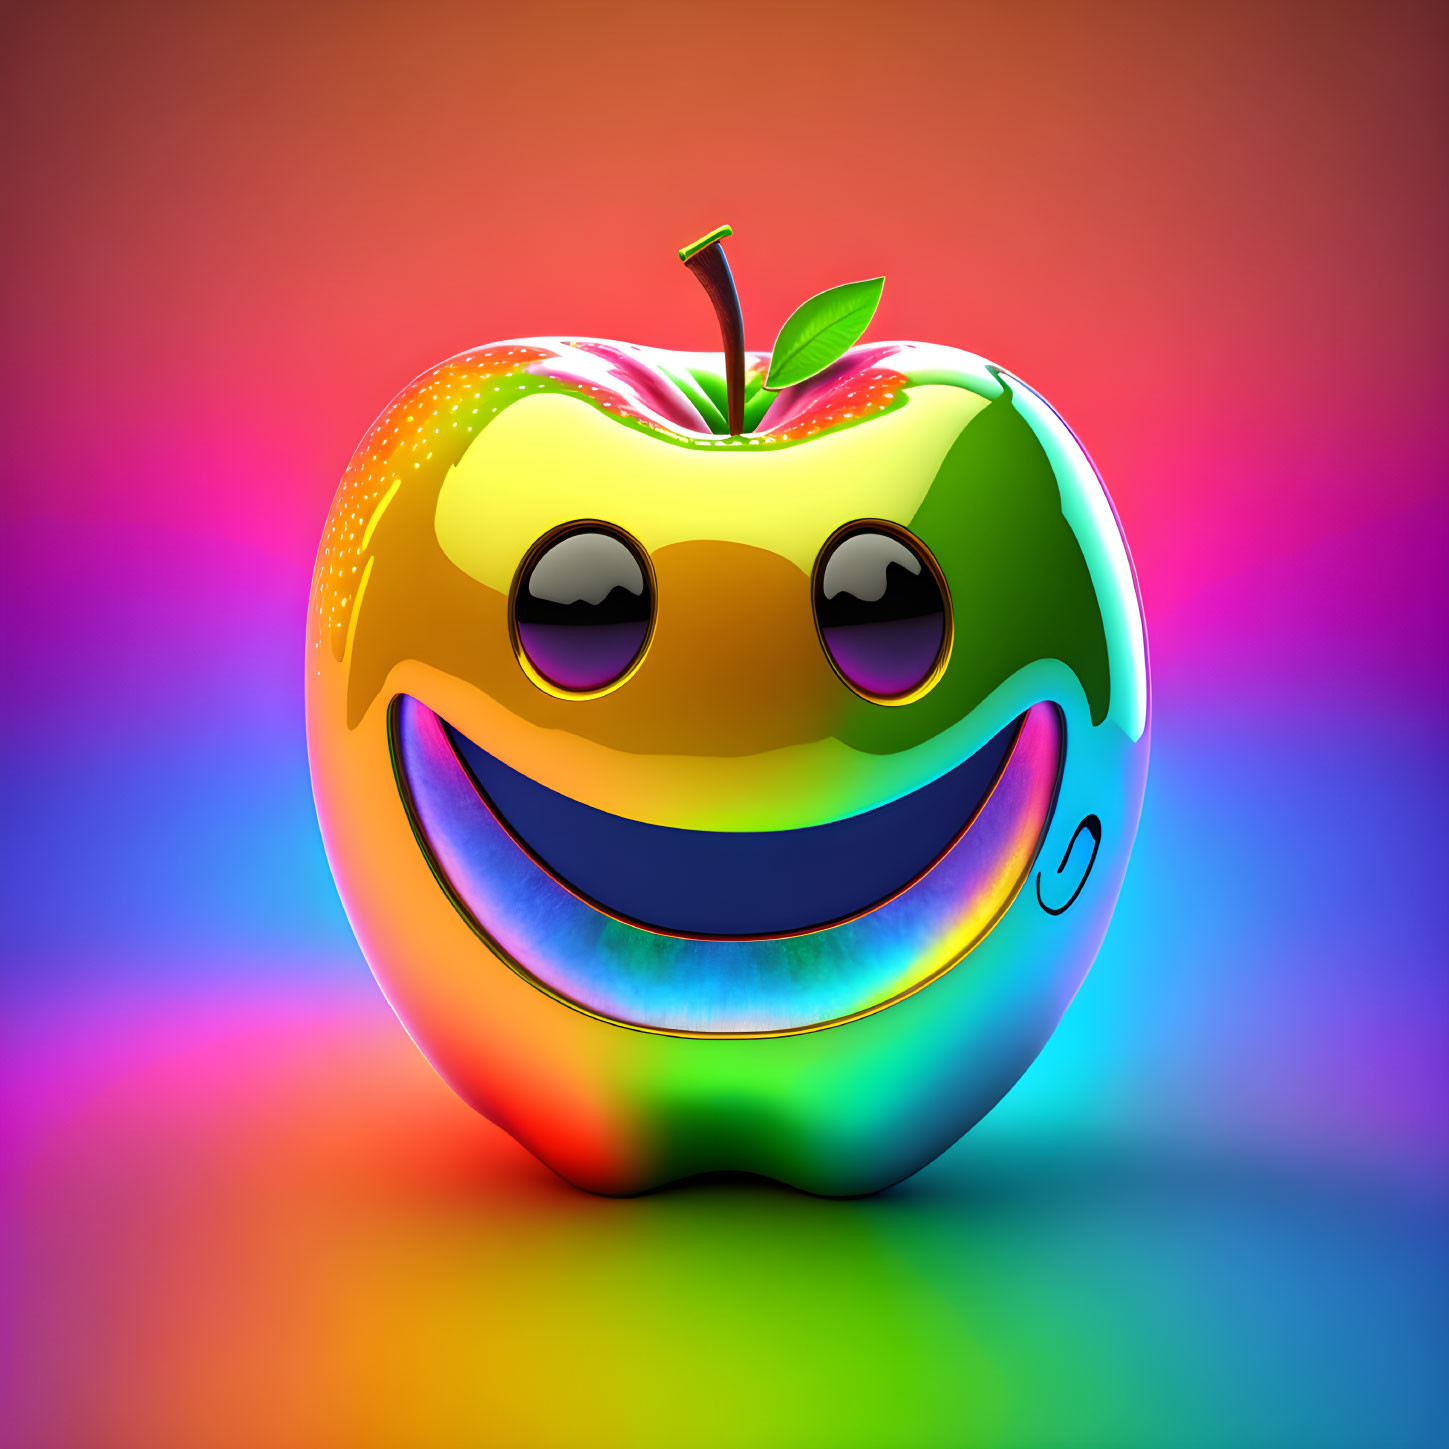 Colorful digital artwork: Cute apple with big eyes and rainbow smile